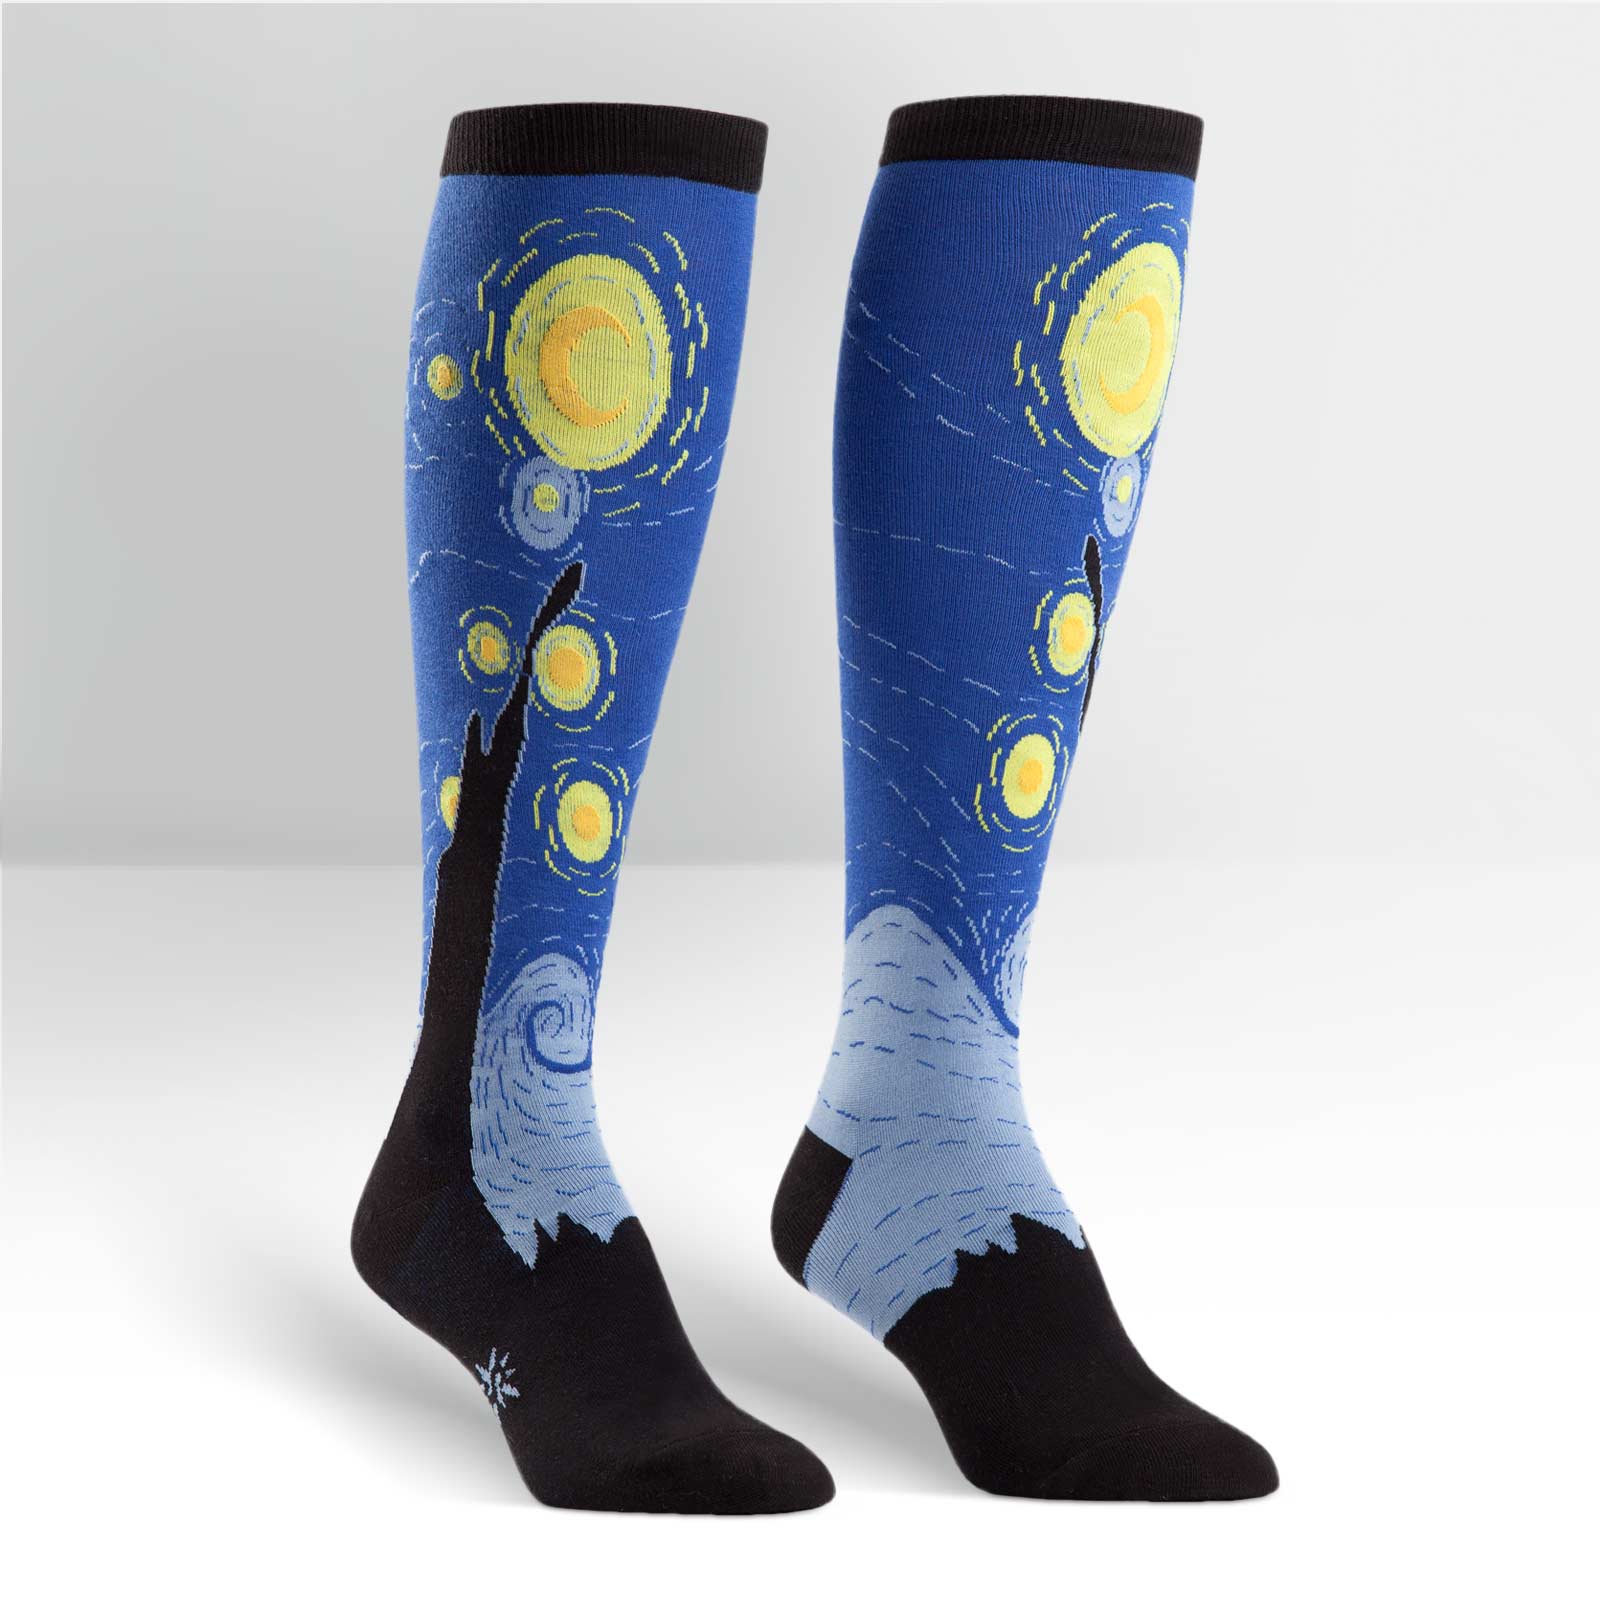 Stretchy Women's knee high socks with a design inspired by 'Starry Night' by Vincent Van Gogh - The Sockery